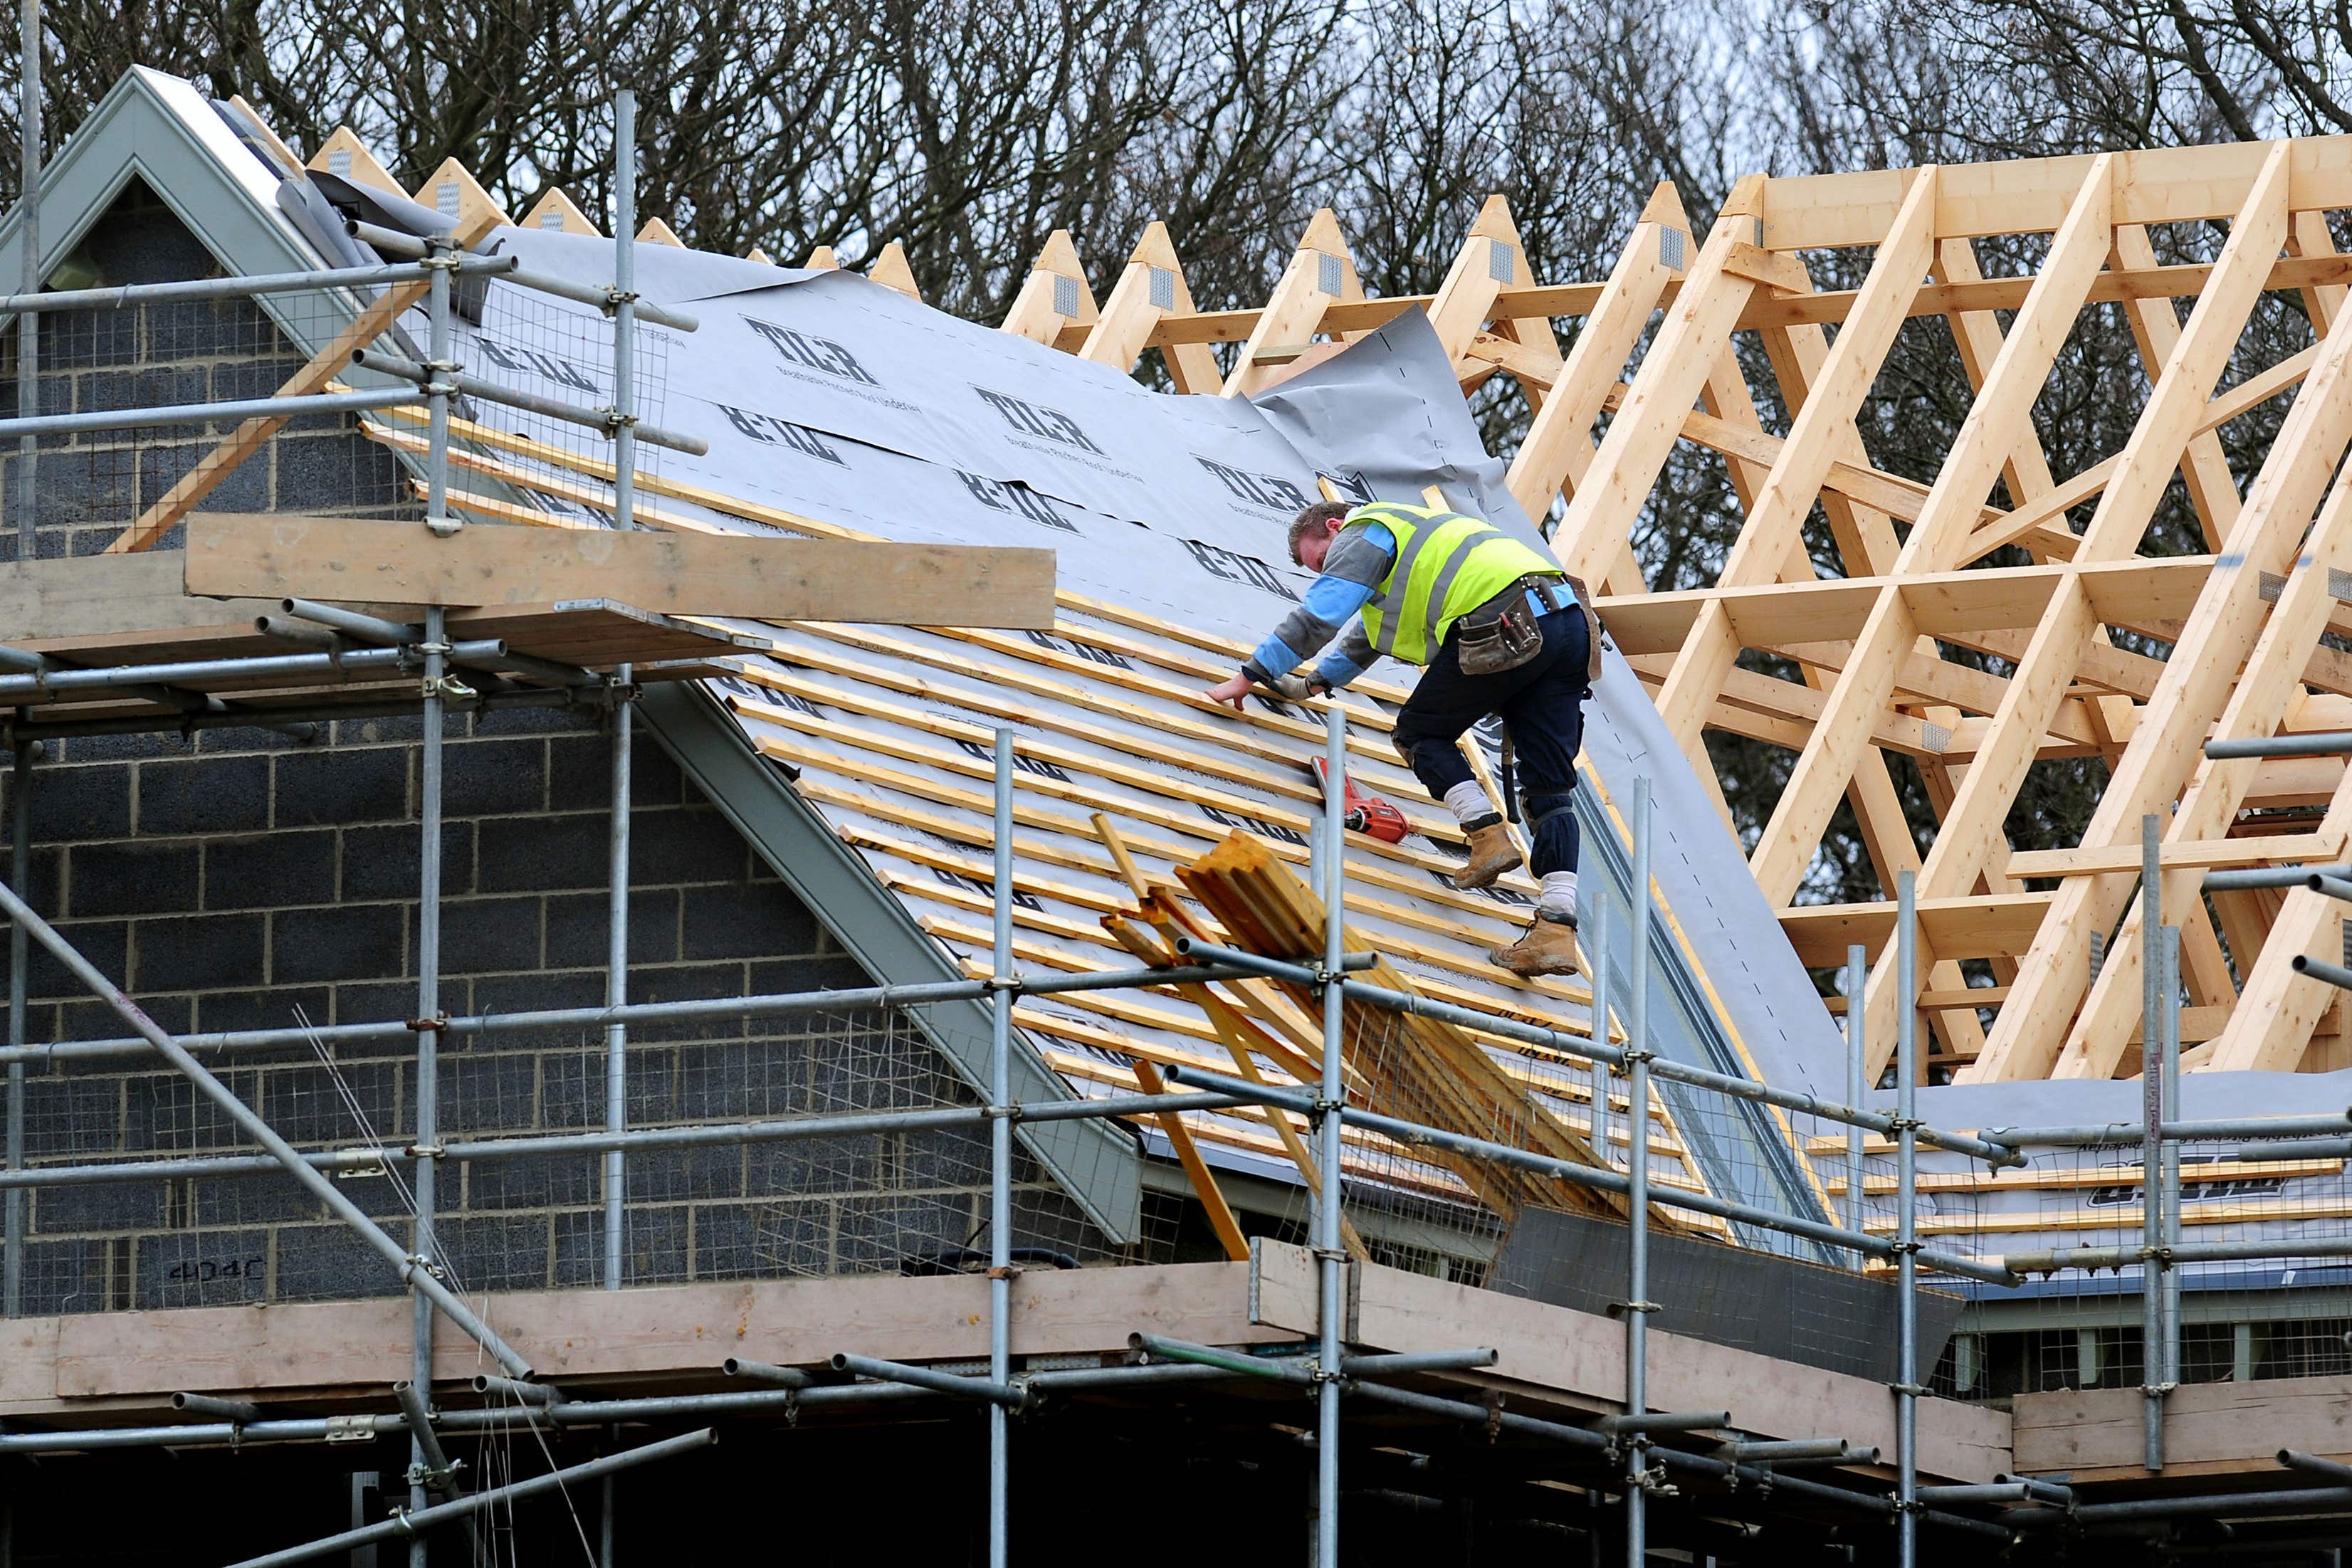 Housebuilder Barratt Developments has revealed early signs of a recovery in homebuyer demand but said reservations remain under pressure